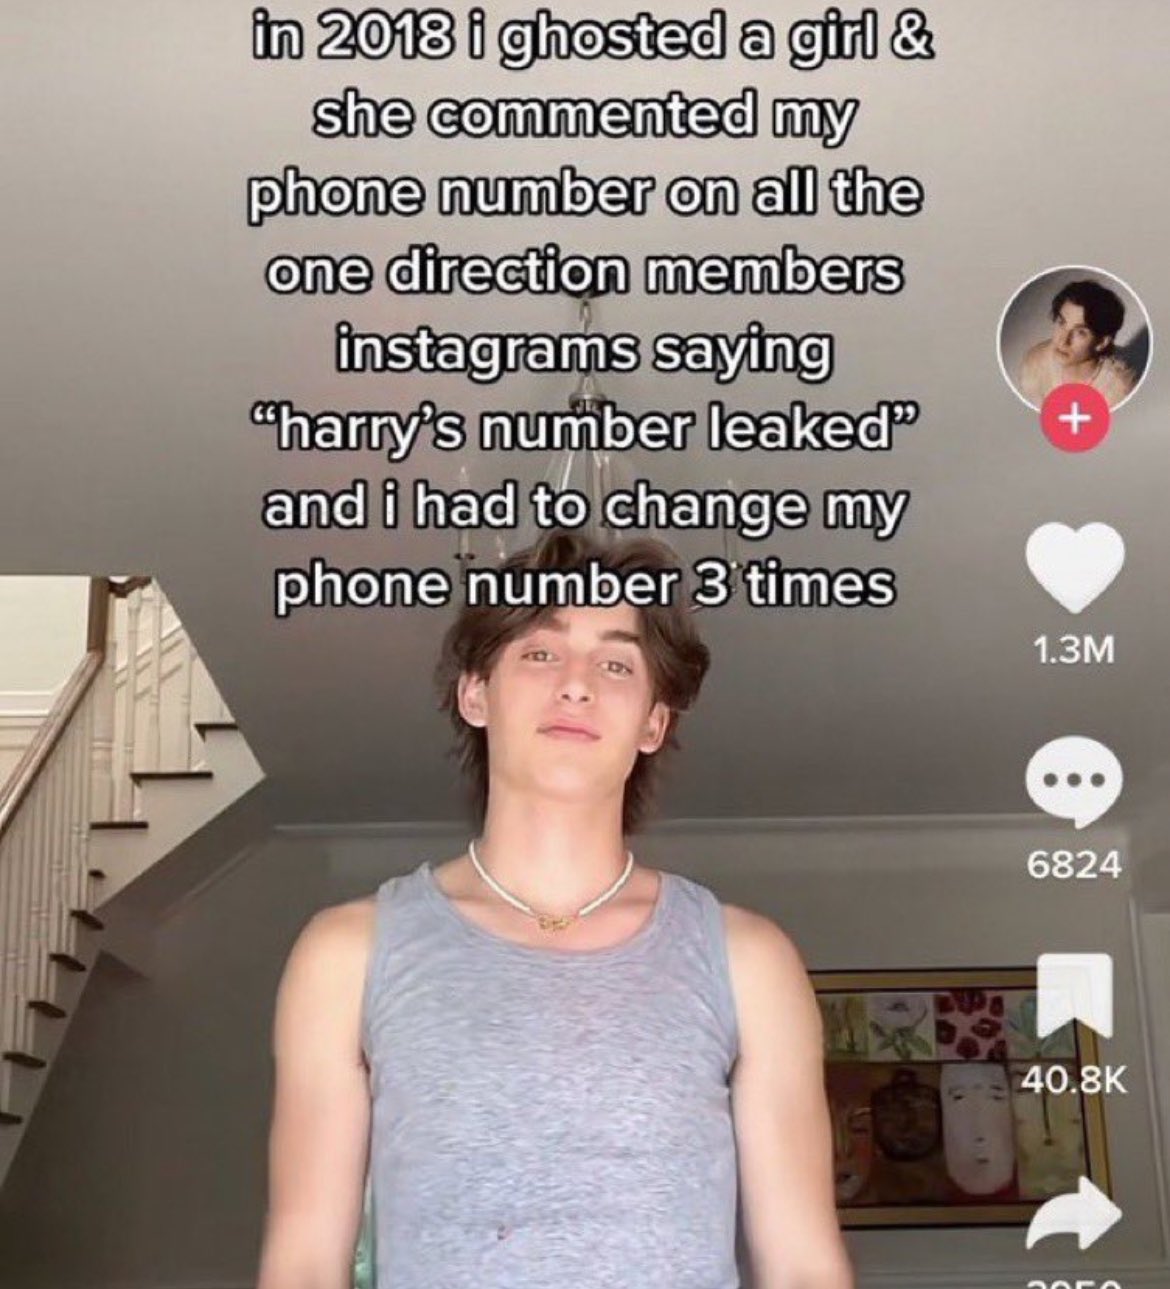 wild tiktok screenshots - One Direction - in 2018 i ghosted a girl & she commented my phone number on all the one direction members instagrams saying "harry's number leaked" and i had to change my phone number 3 times 1.3M 6824